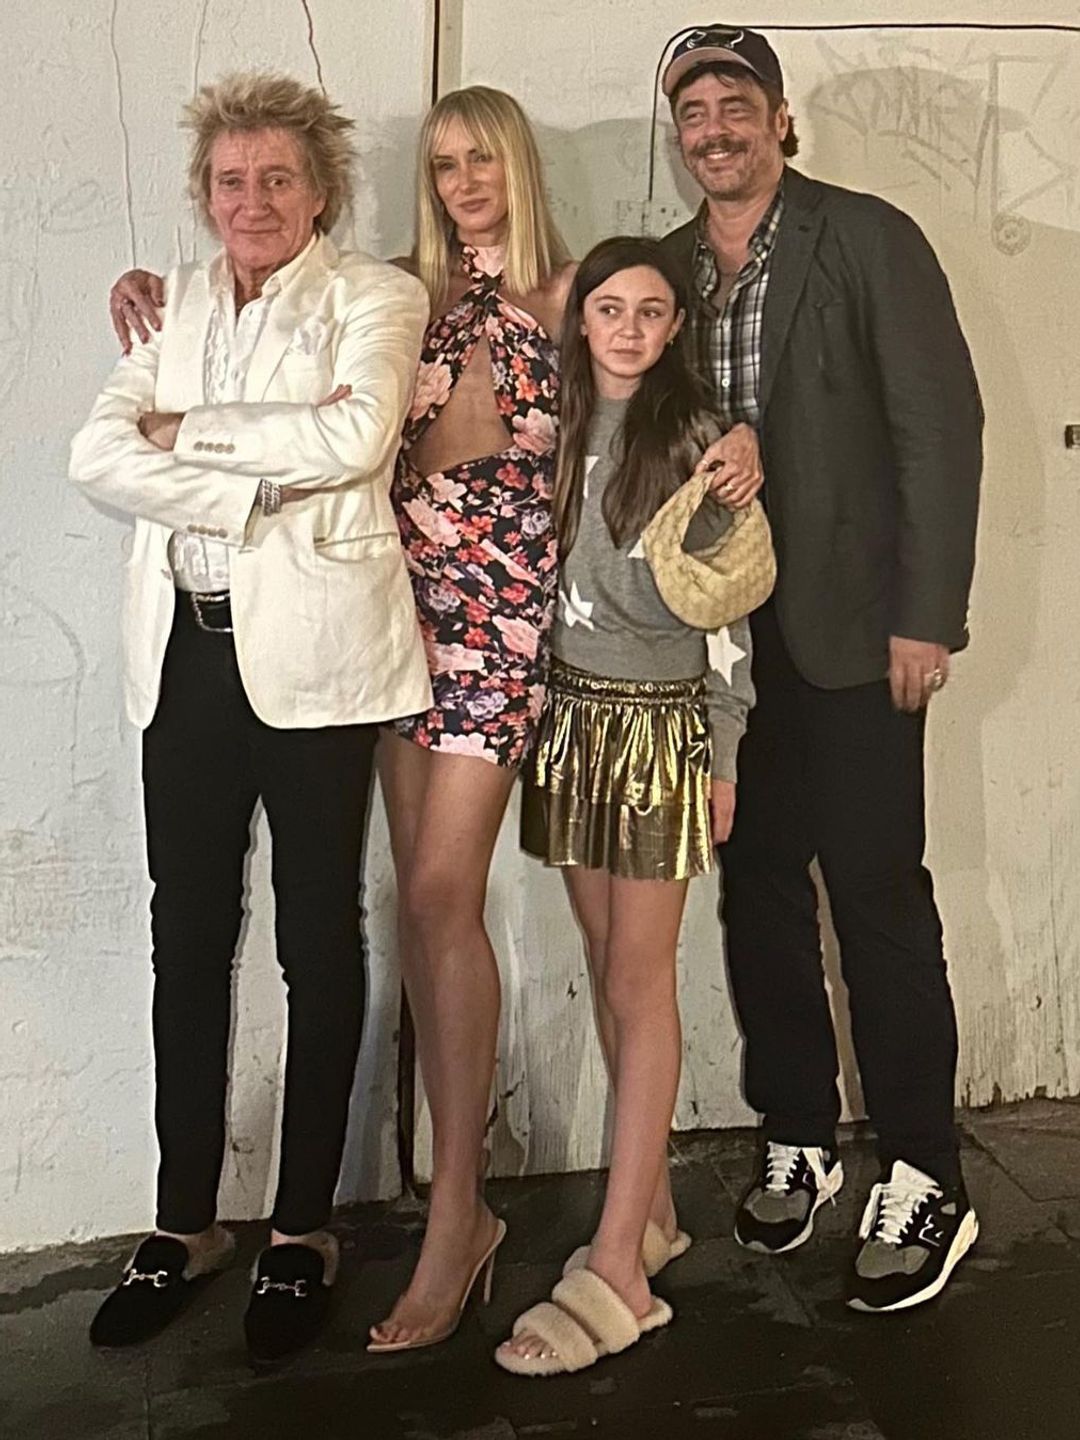 Rod with his daughter Kimberley, granddaughter Delilah and Delilah's father, Benicio del Toro